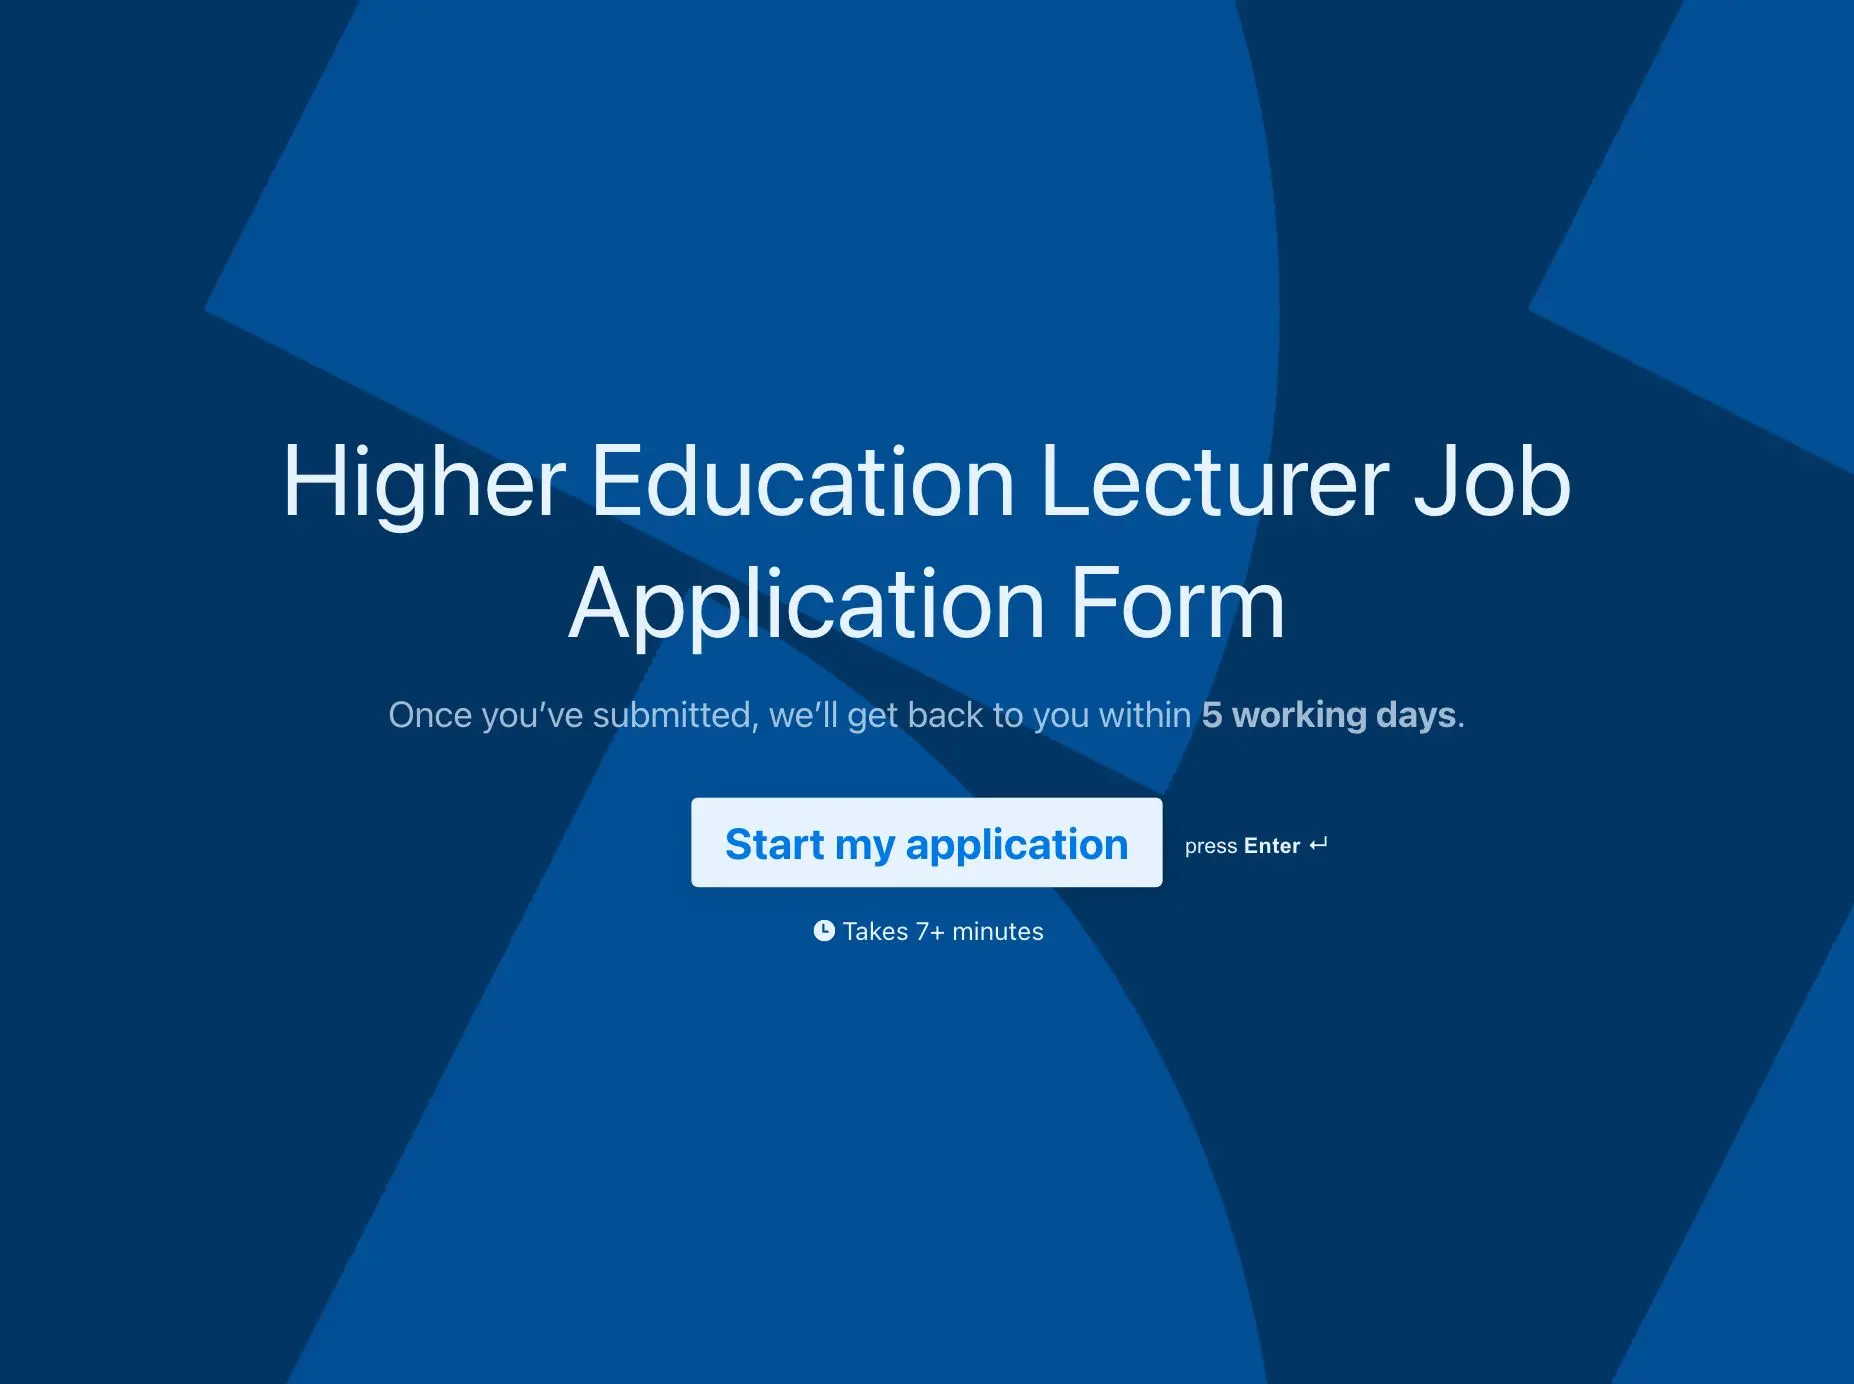 Higher Education Lecturer Job Application Form Template Hero